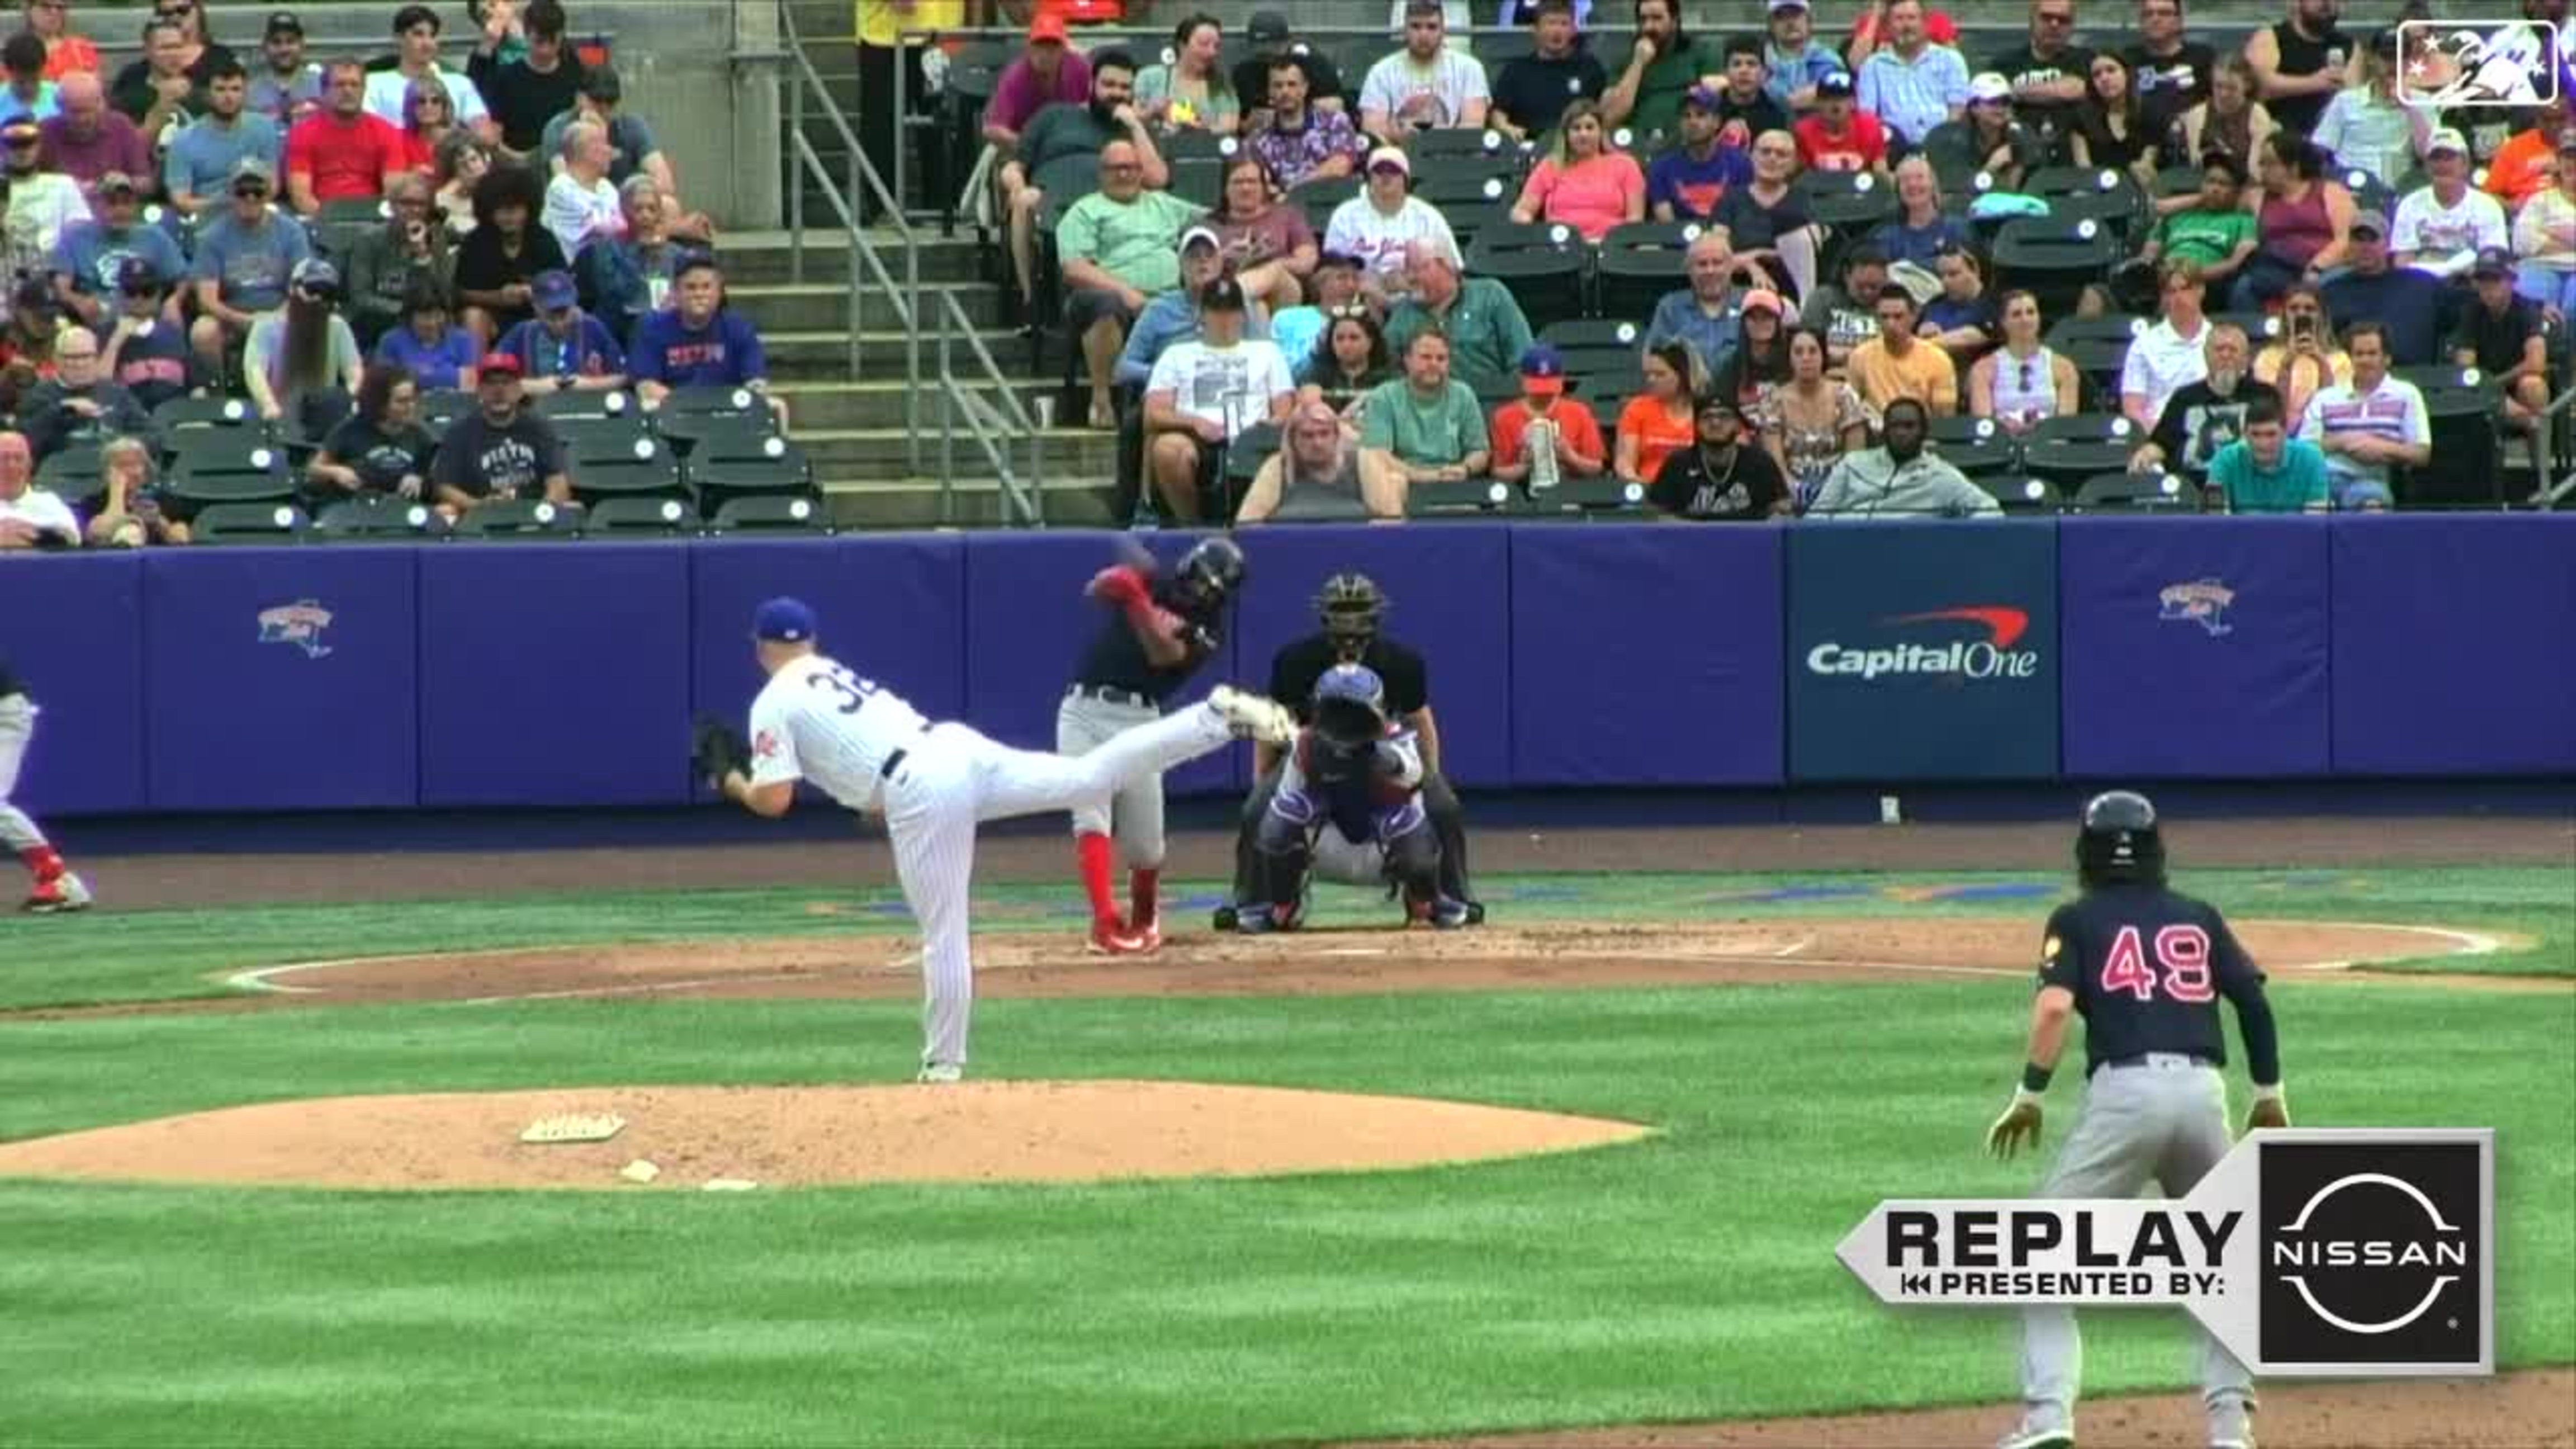 Red Sox's Triple-A team claims Bobby Dalbec blasted 515-foot home run